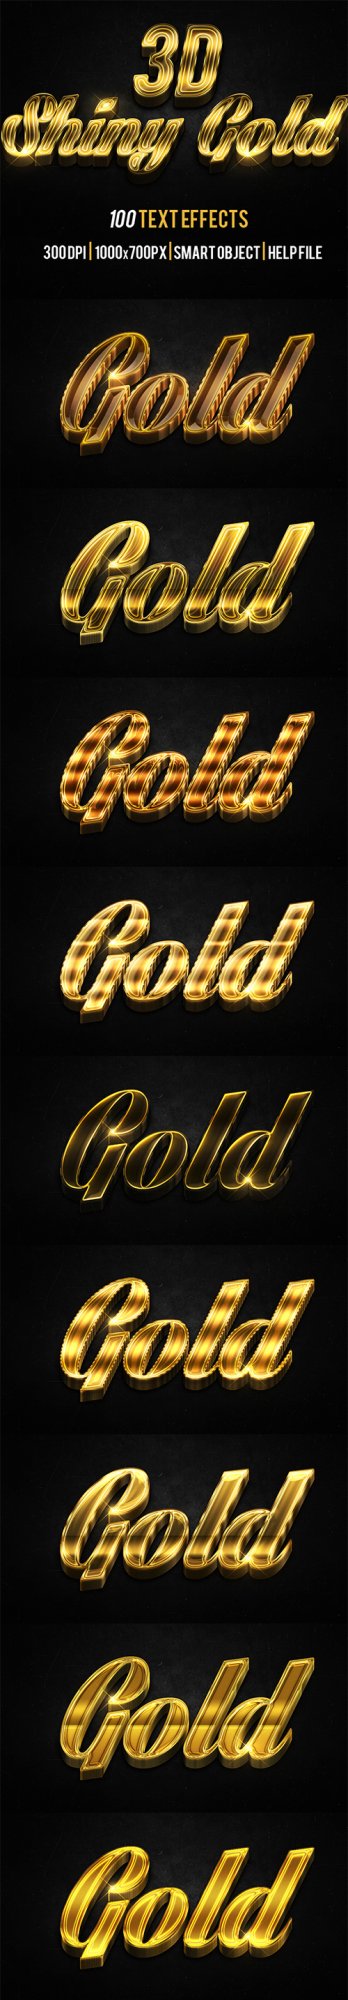 GraphicRiver - 100 3D Shiny Gold Text Effects